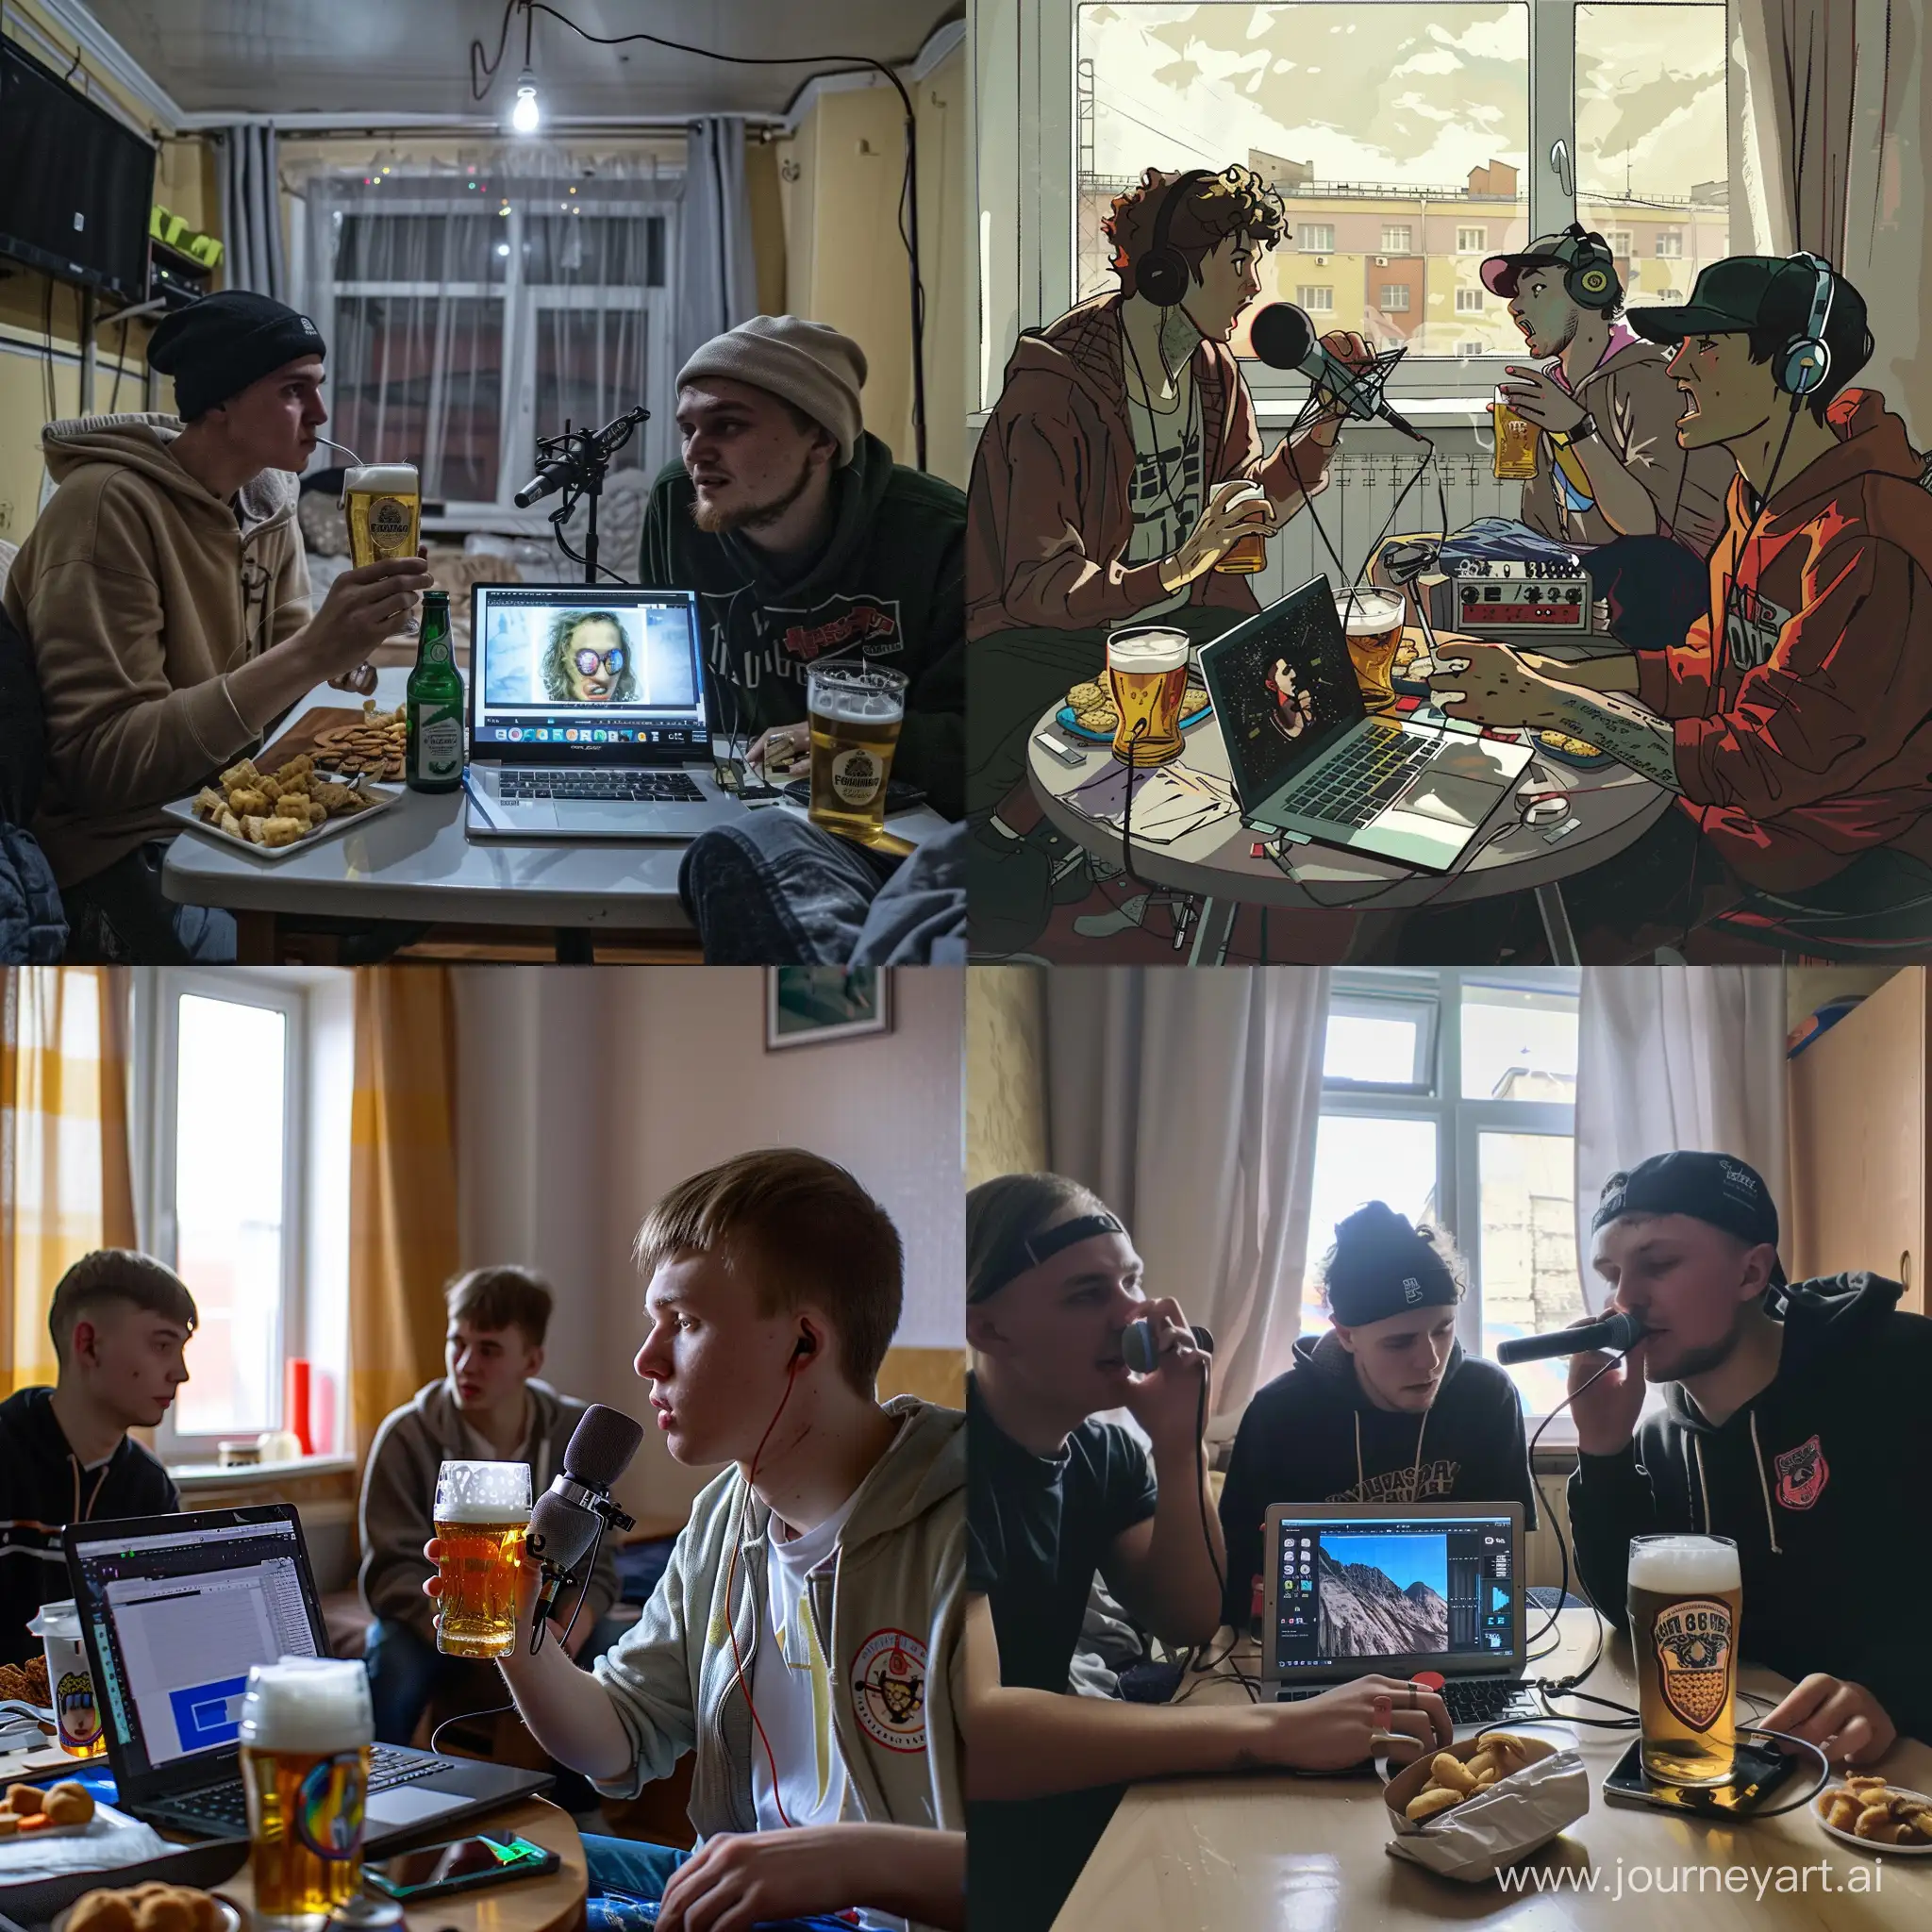 Russian-Students-Recording-Rap-in-Dormitory-with-Beer-and-Snacks